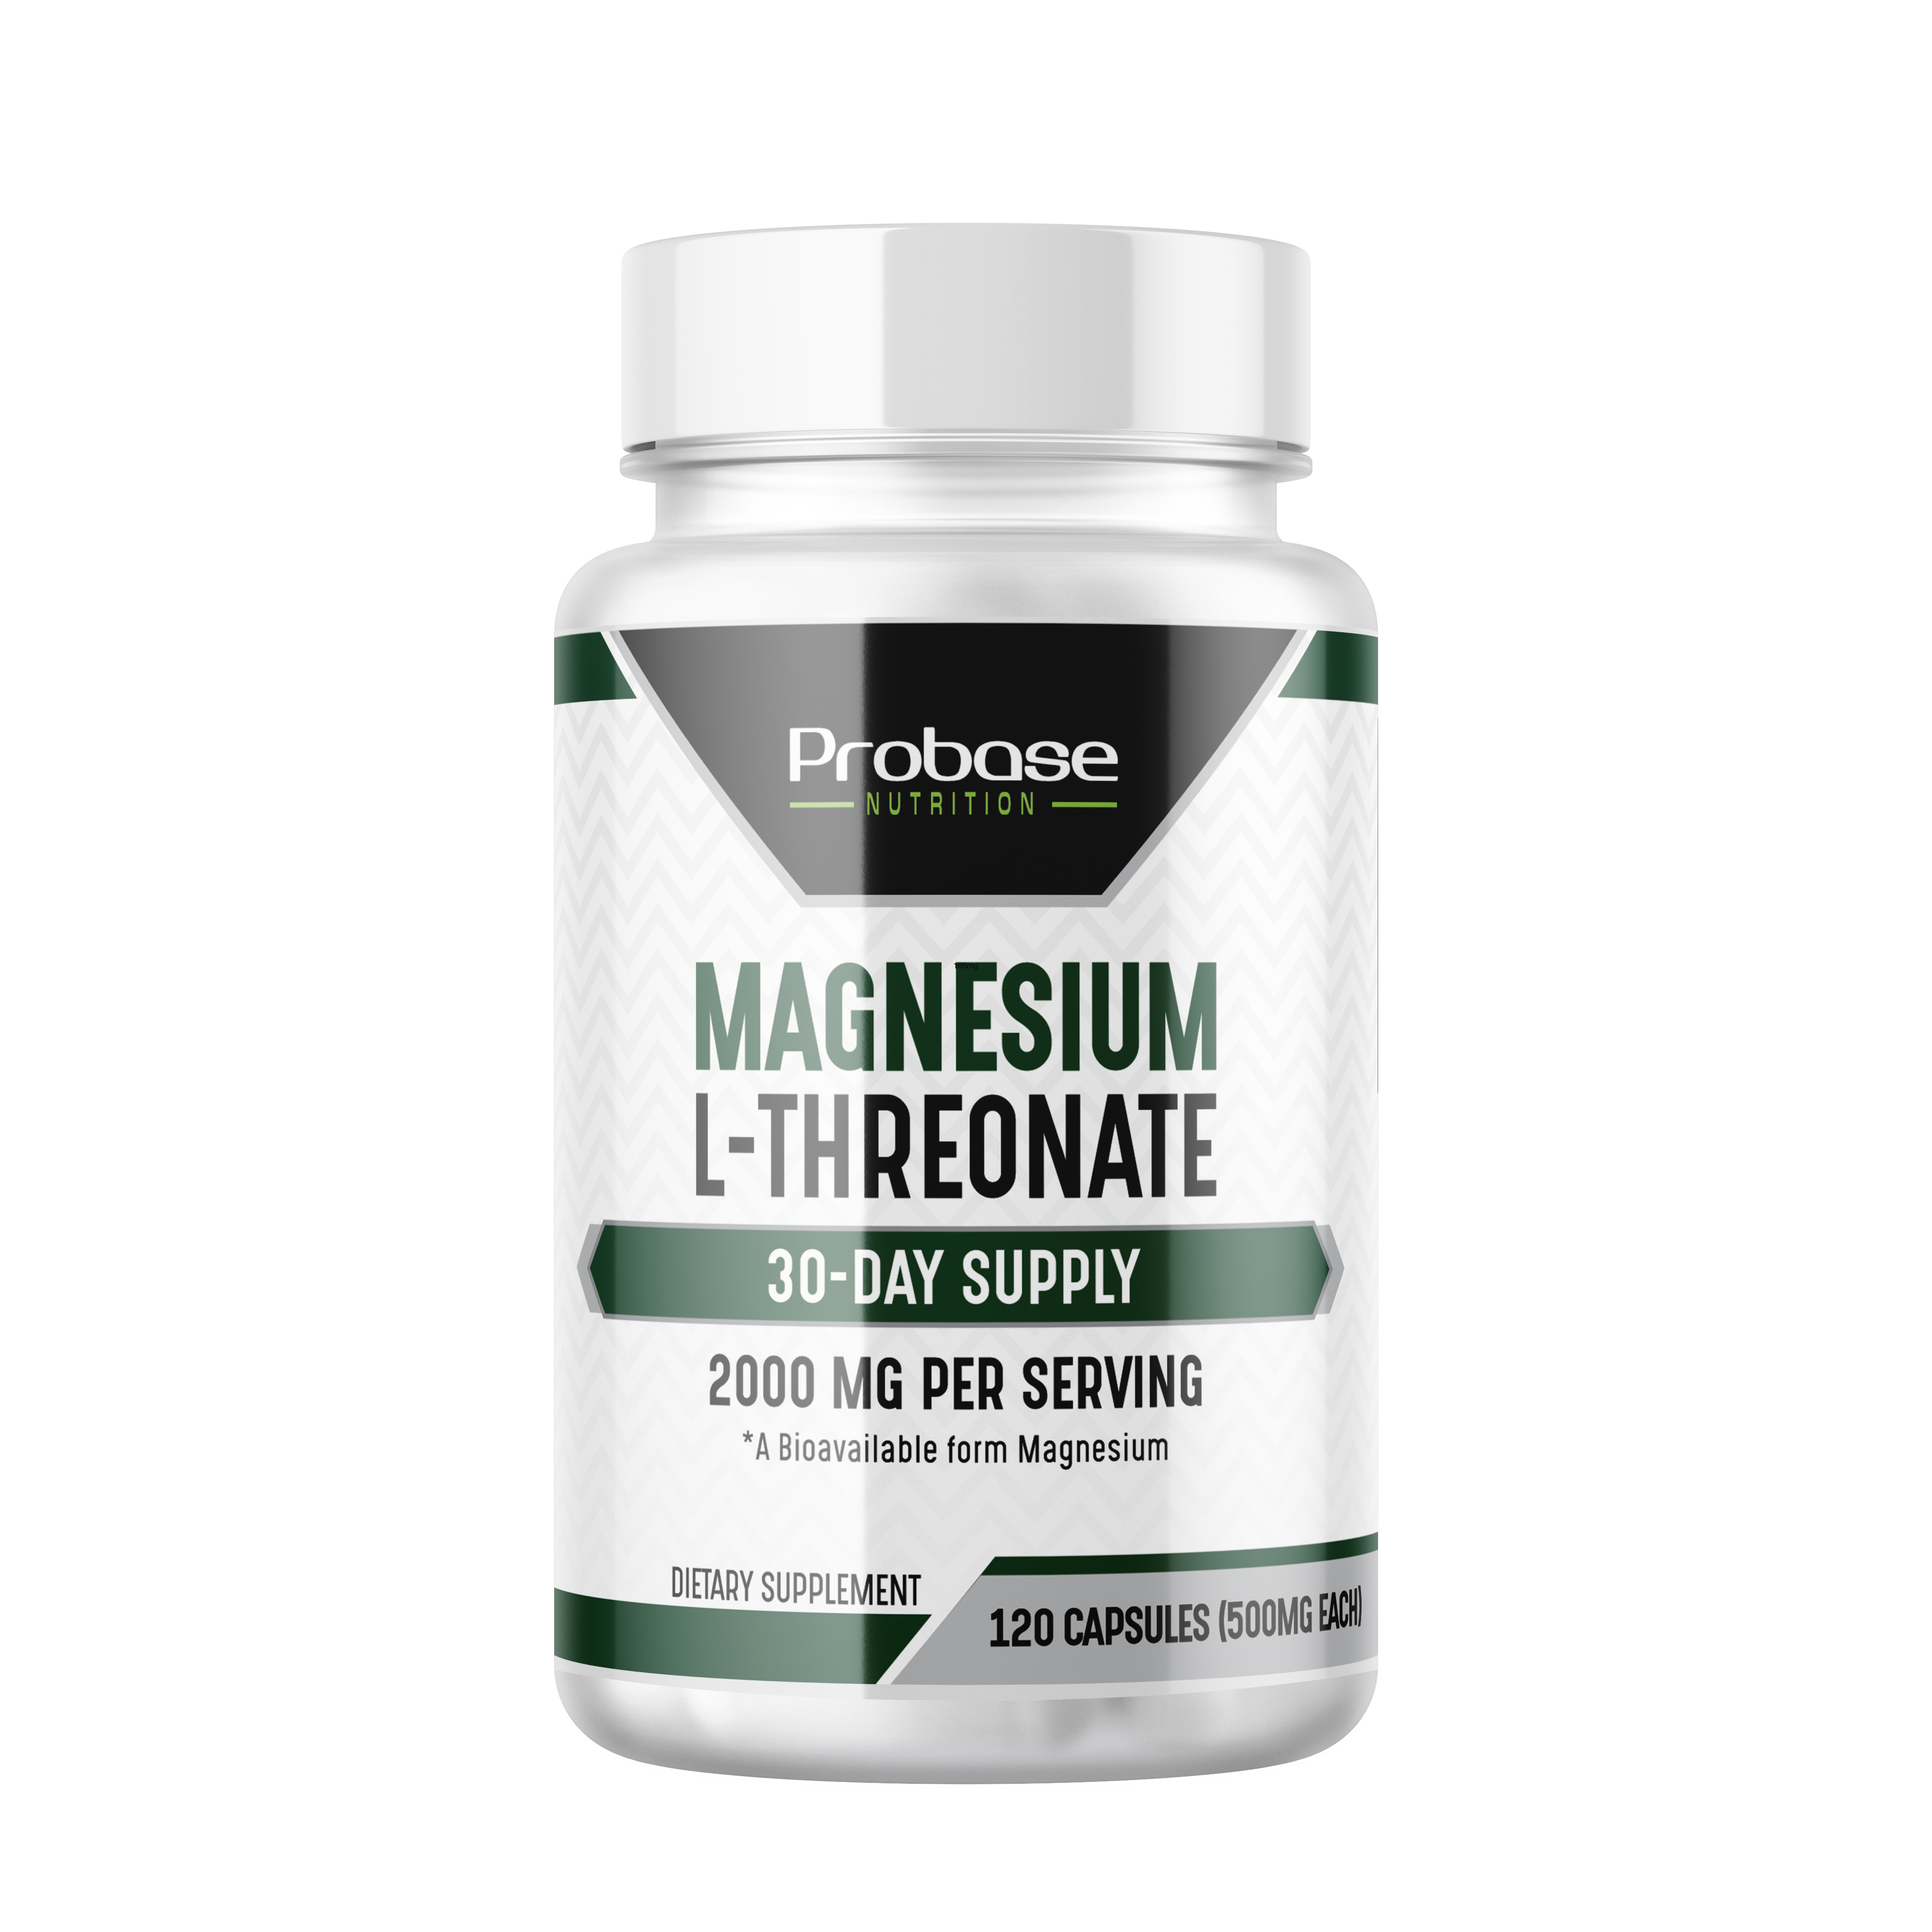 The Magnesium Revolution: How Probase Nutrition L-Threonate Magnesium Charges Your Mind and Body